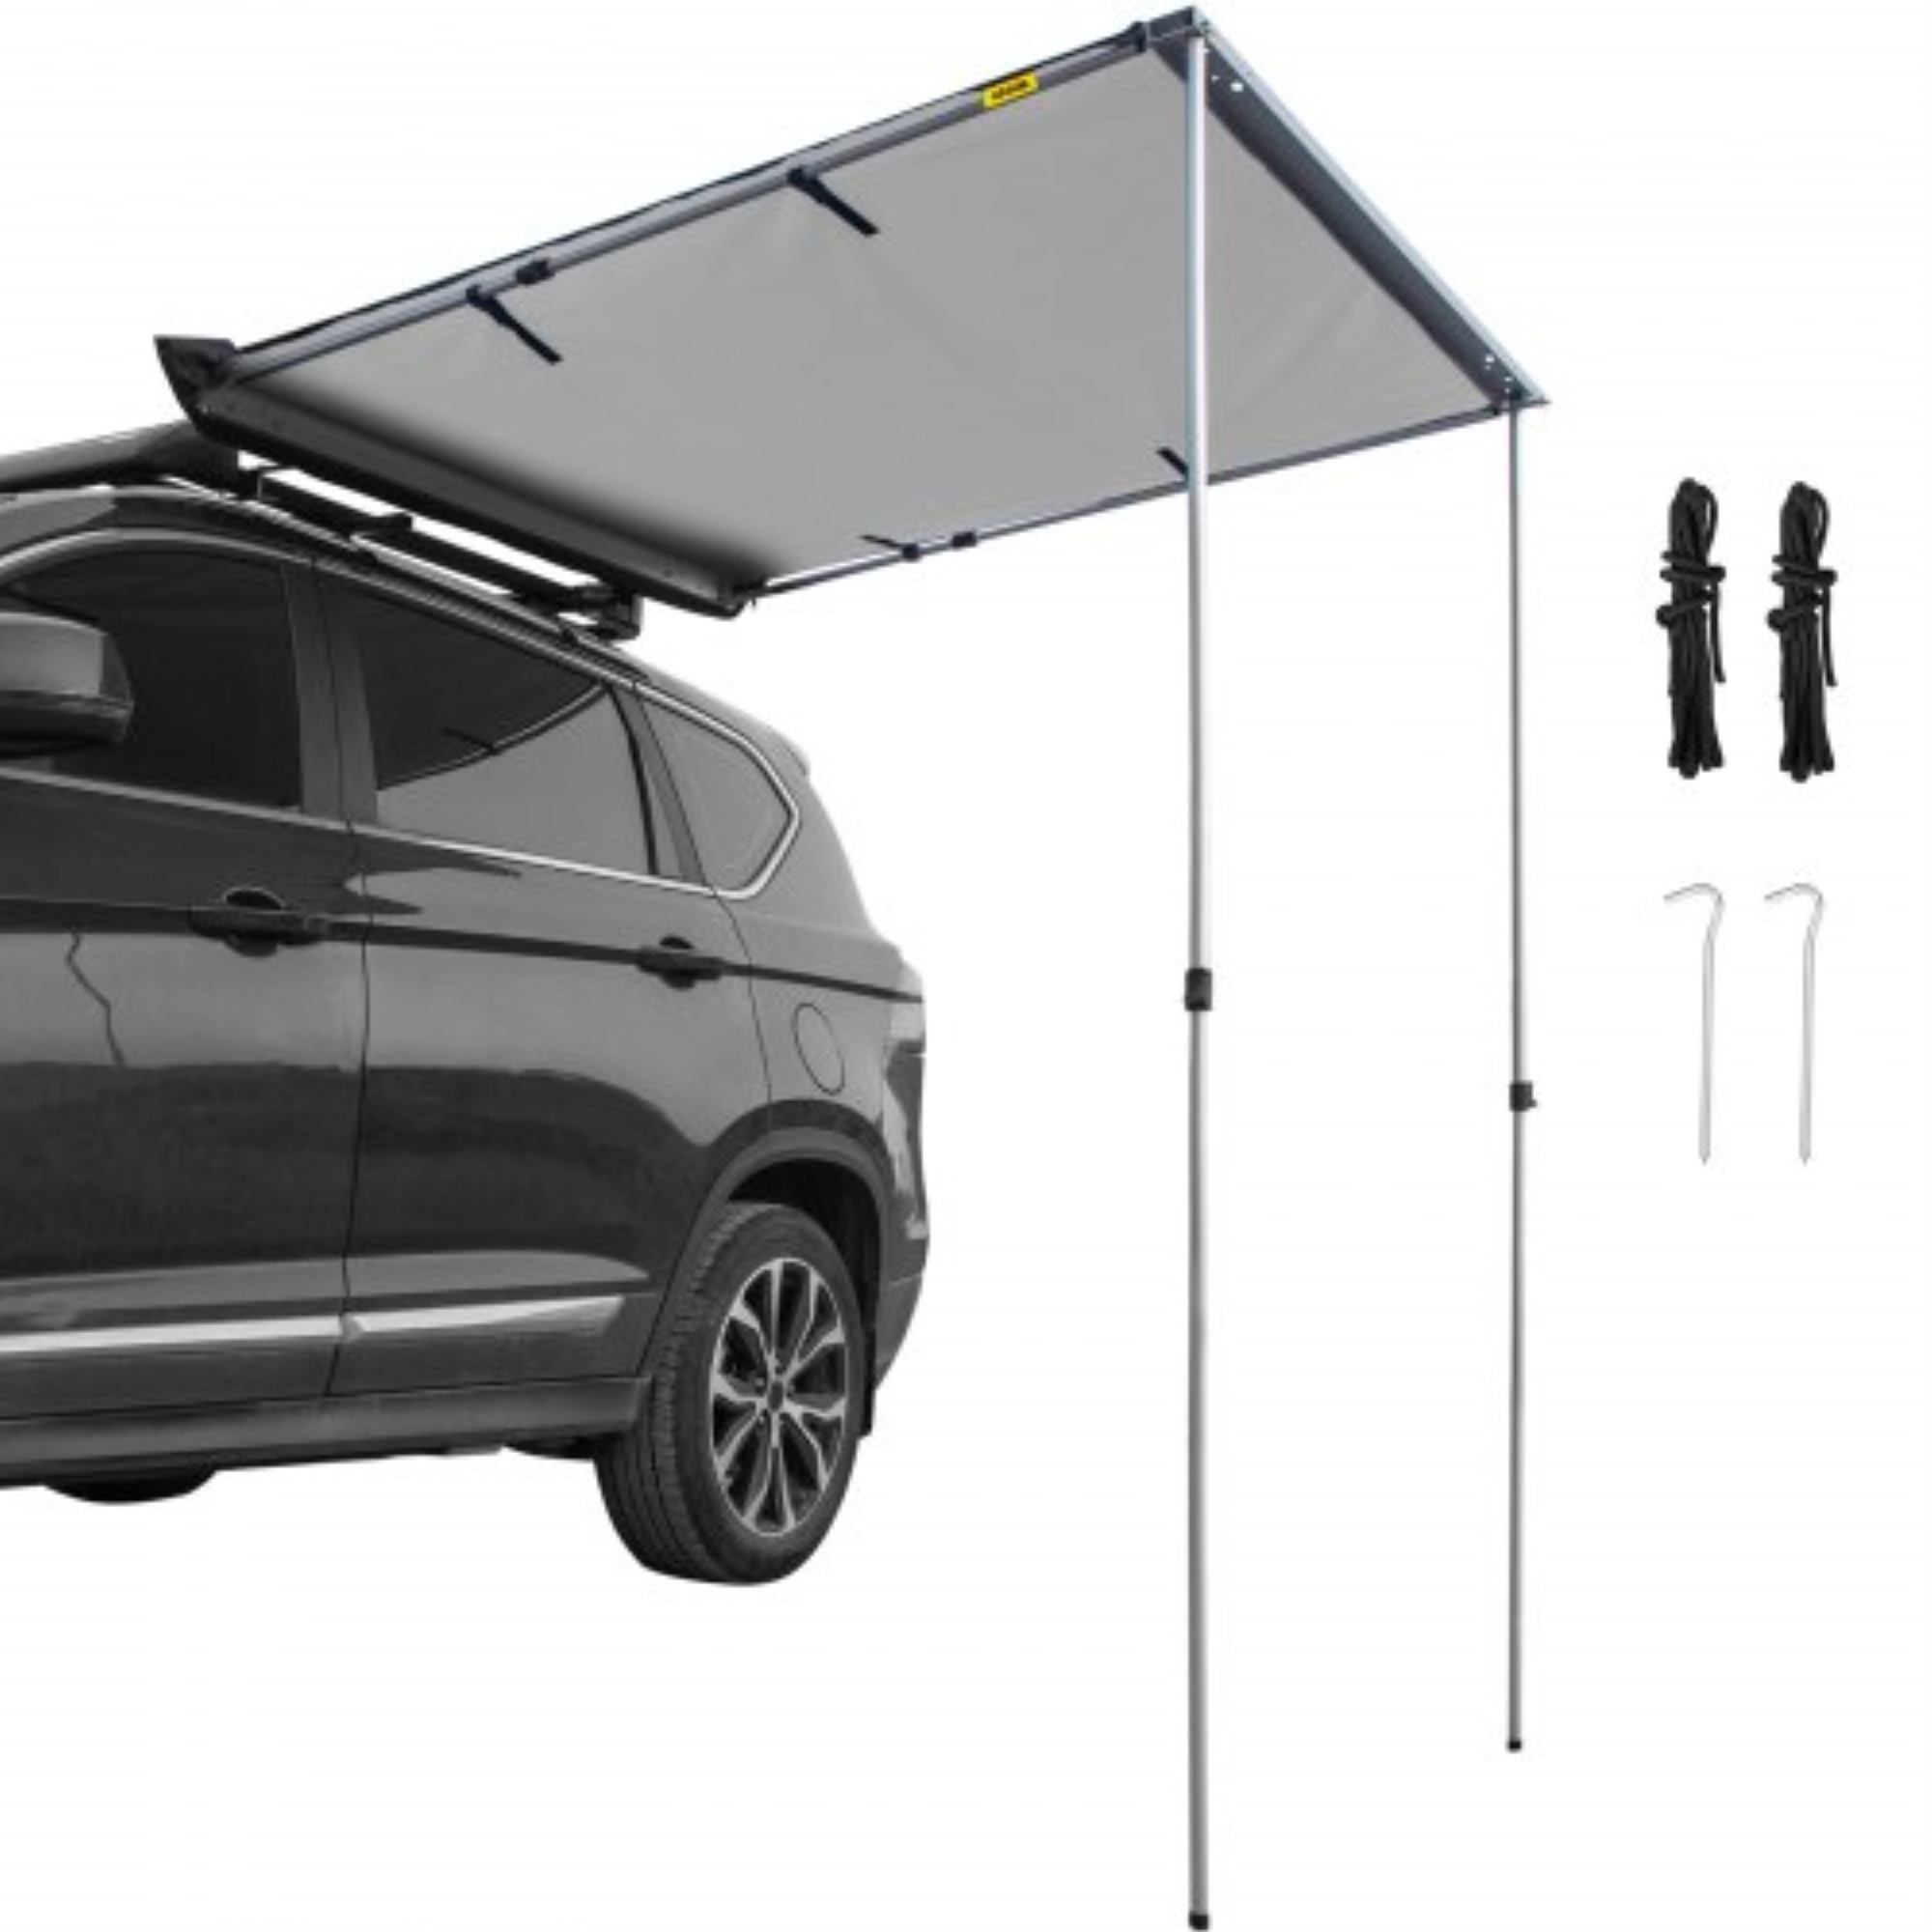 VEVOR Car Side Awning, 4.6'x6.6', Pull-Out Retractable Vehicle Awning Waterproof UV50+, Telescoping Poles Trailer Sunshade Roo